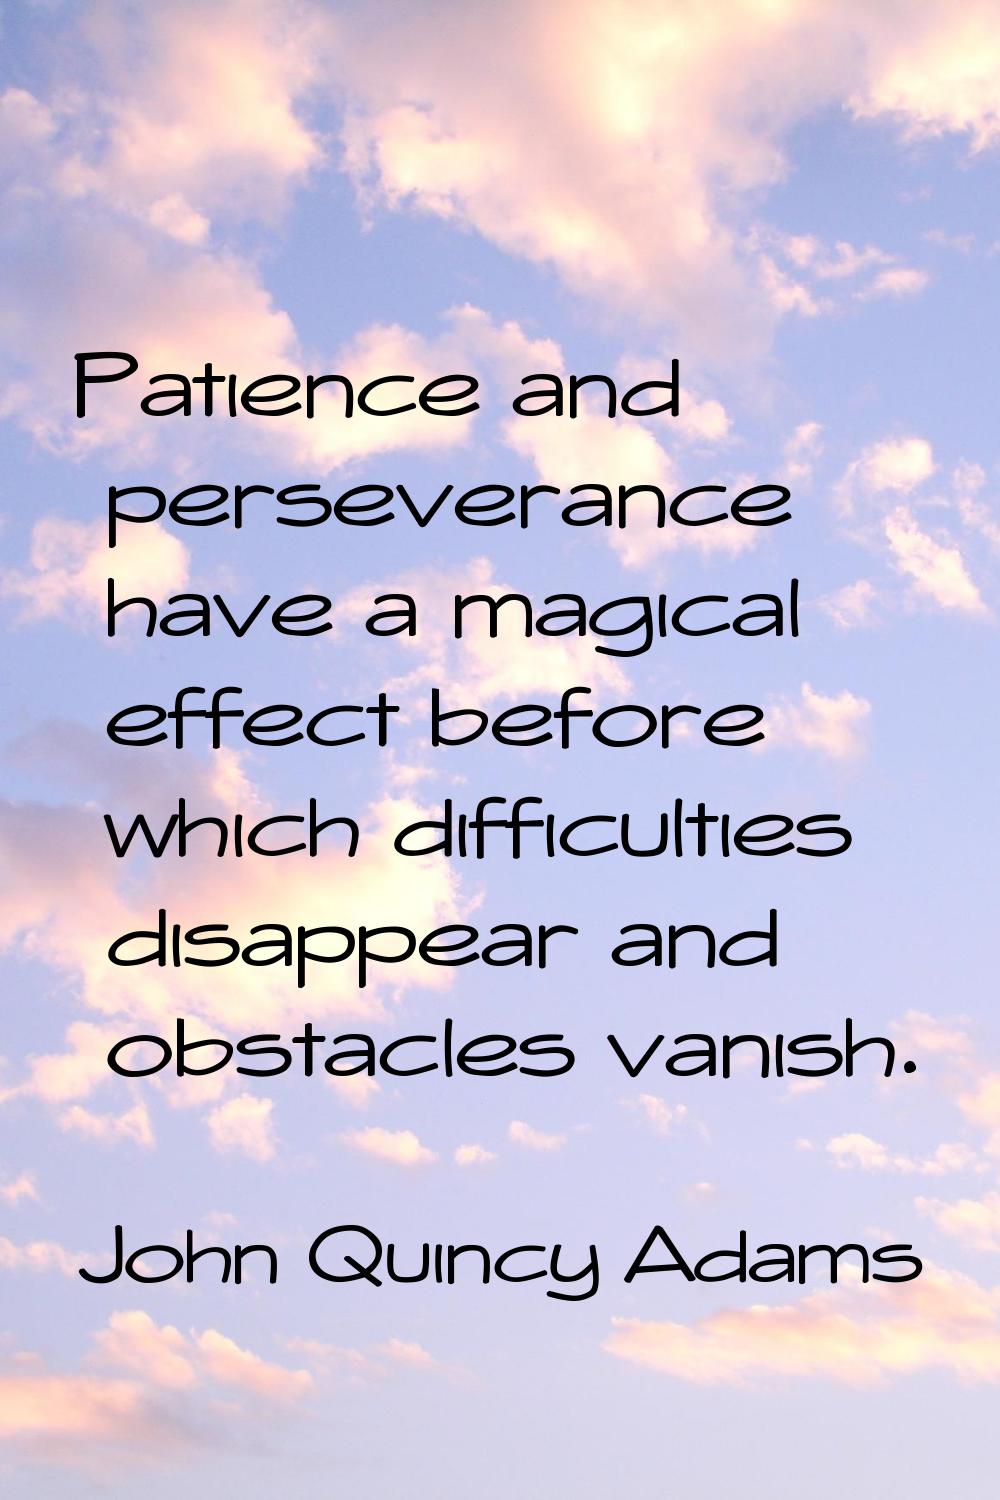 Patience and perseverance have a magical effect before which difficulties disappear and obstacles v